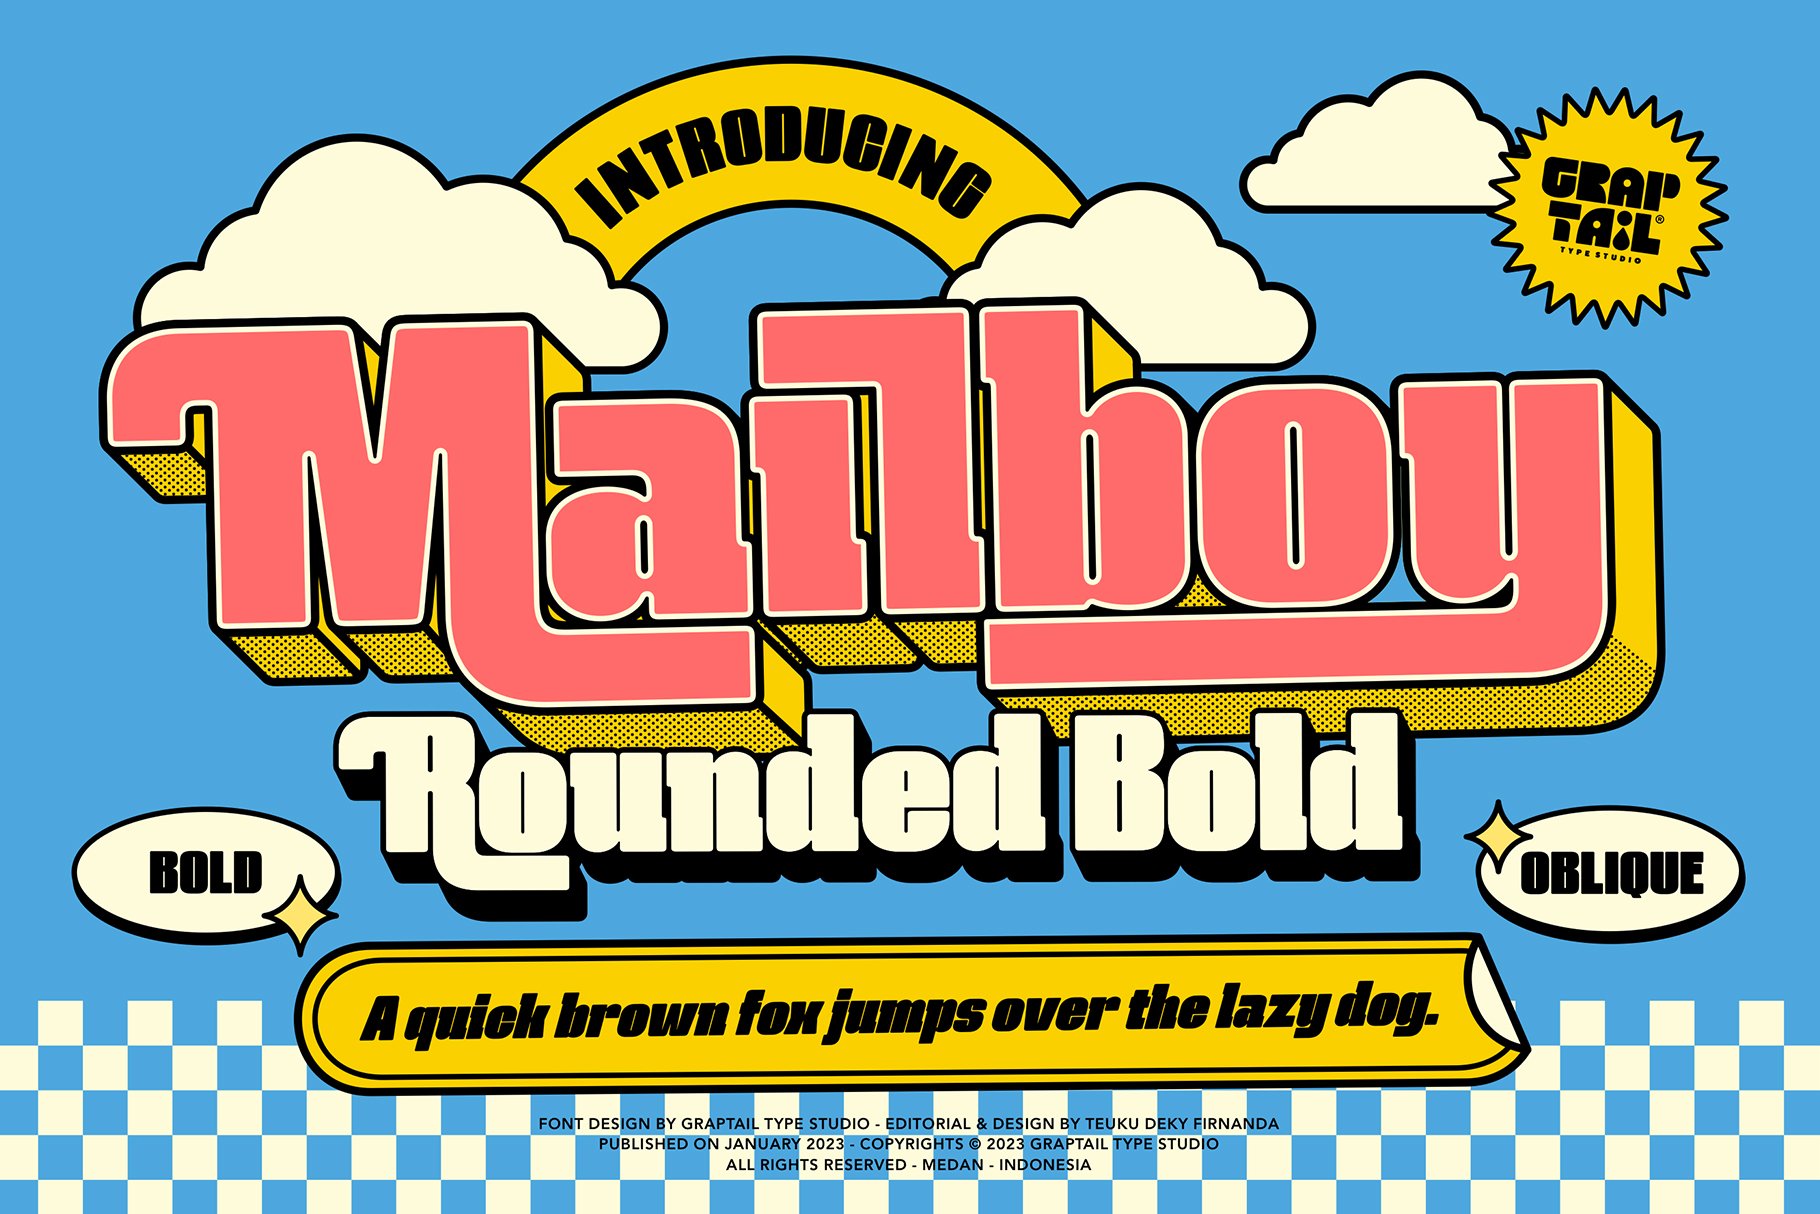 Mailboy - Rounded Bold cover image.